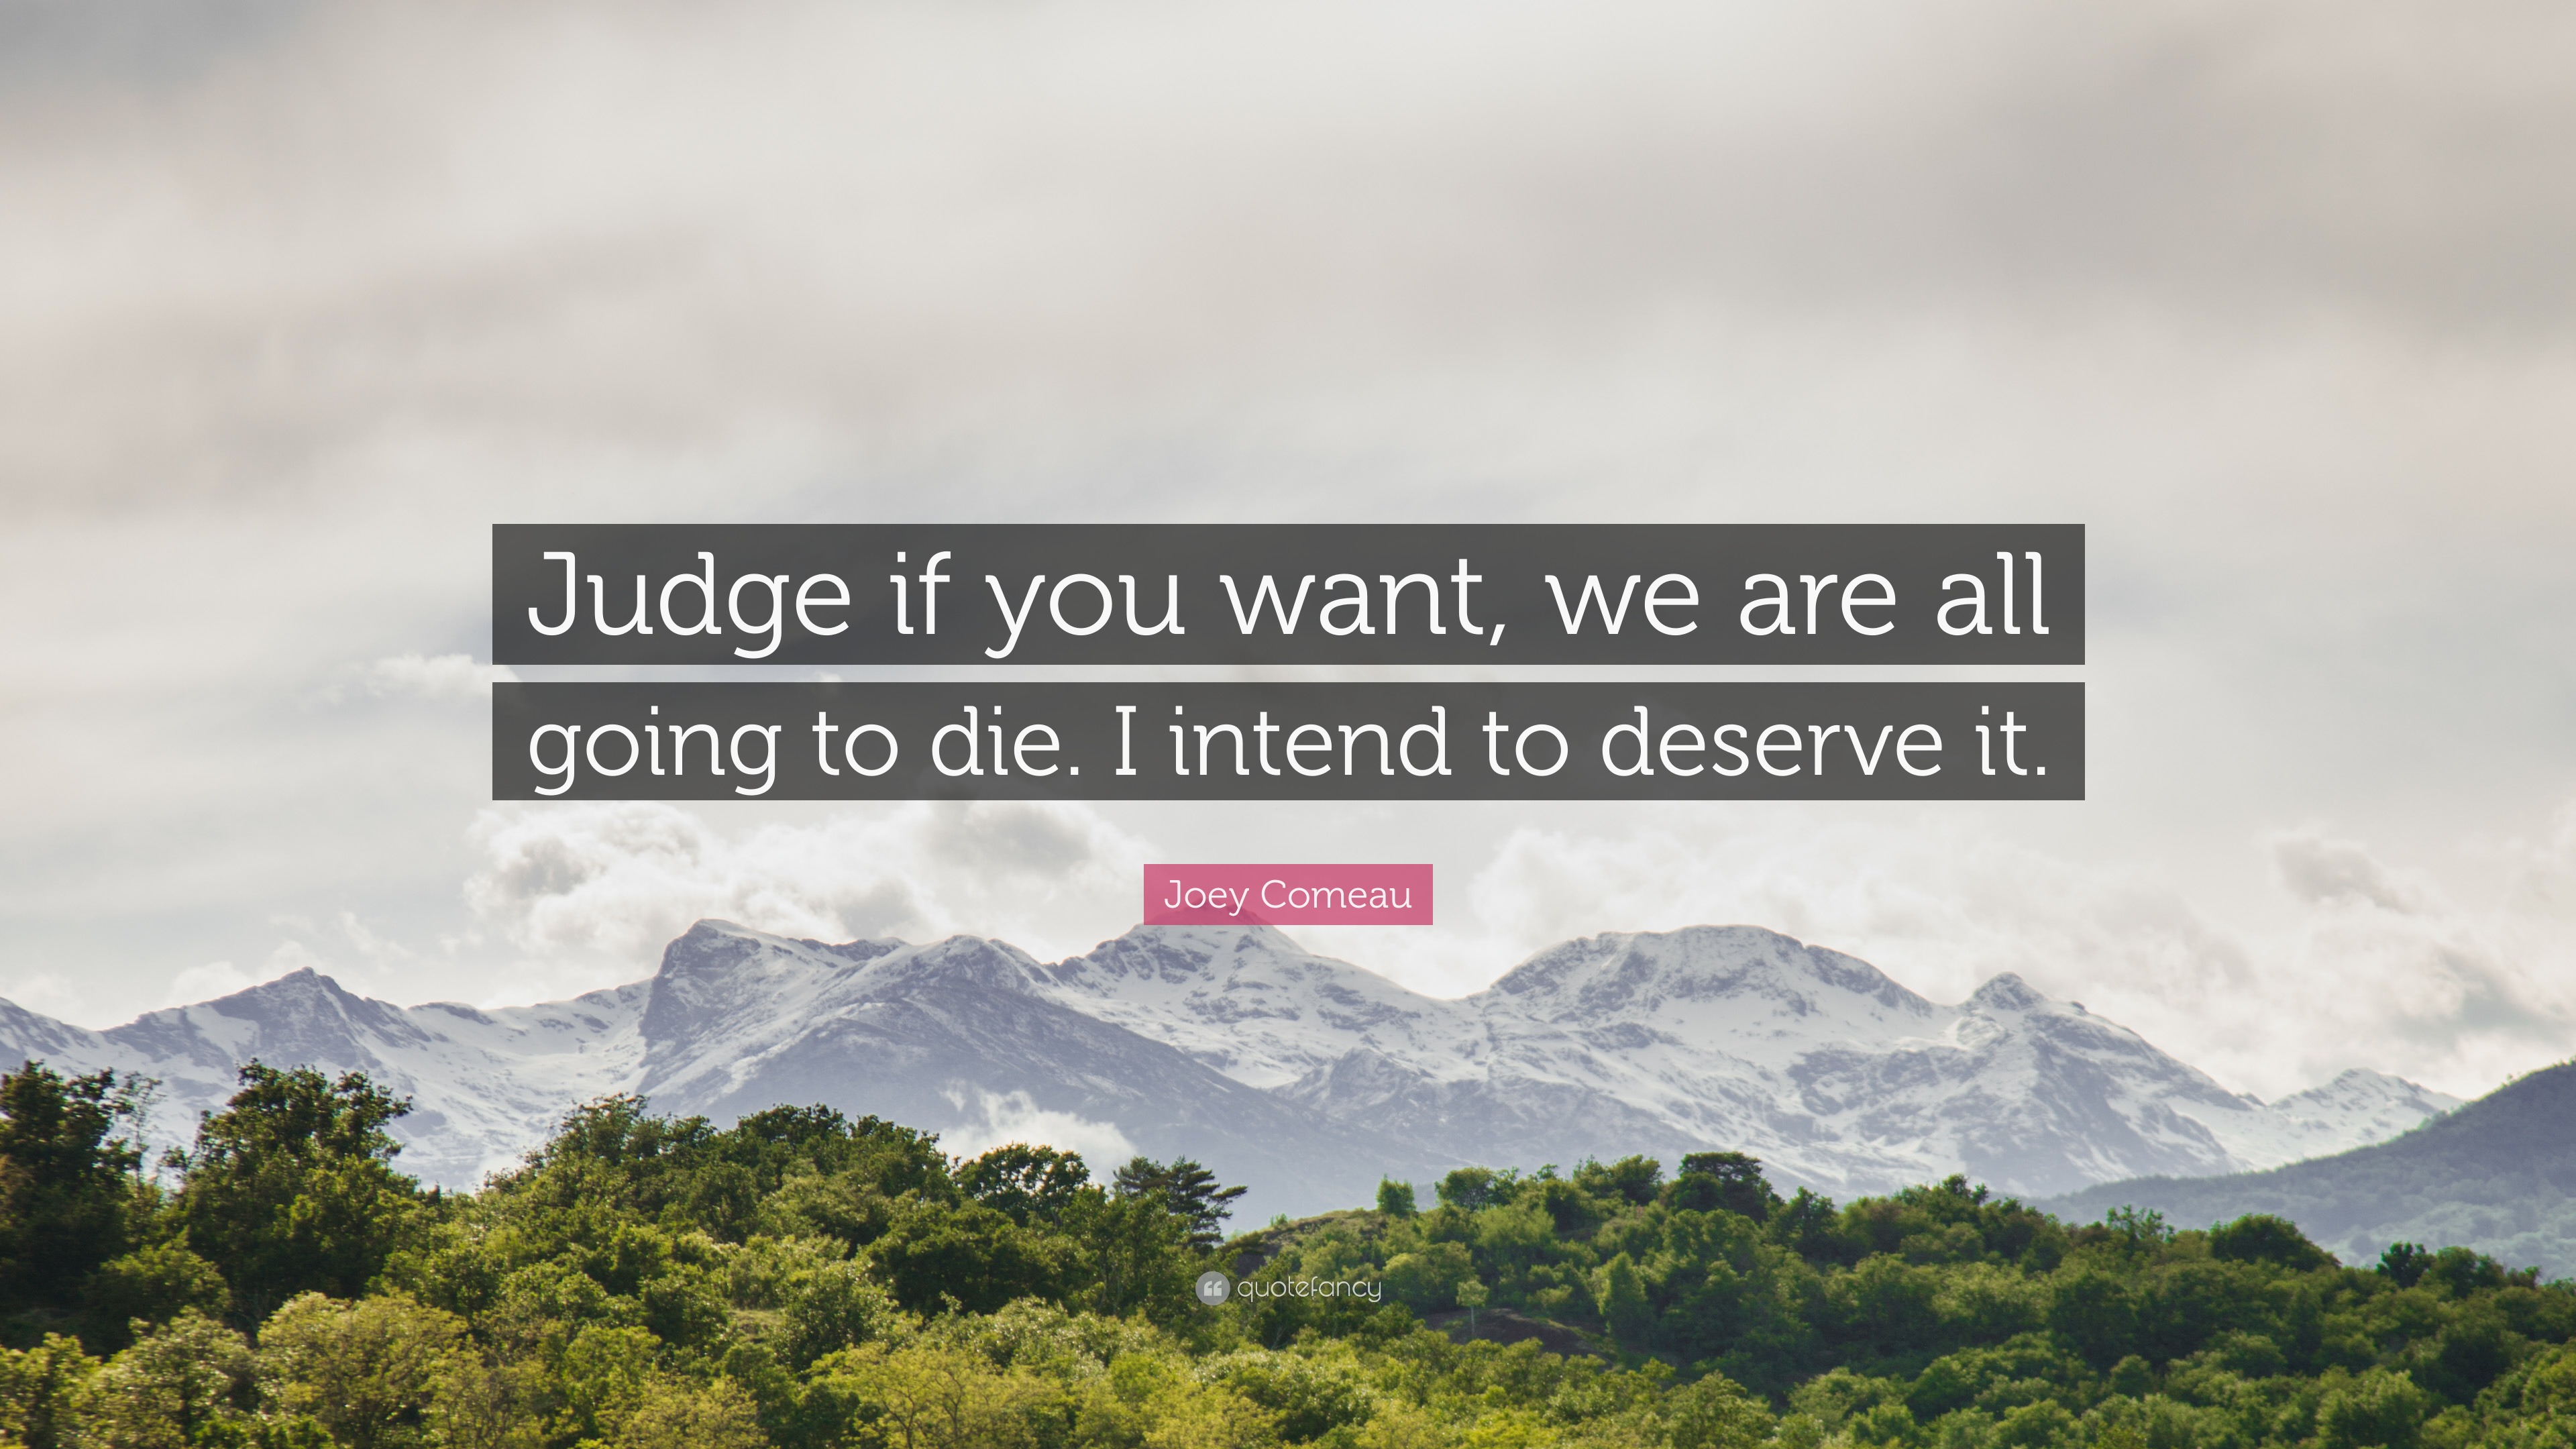 Joey Comeau Quote: "Judge if you want, we are all going to die. I intend to deserve it." (7 ...